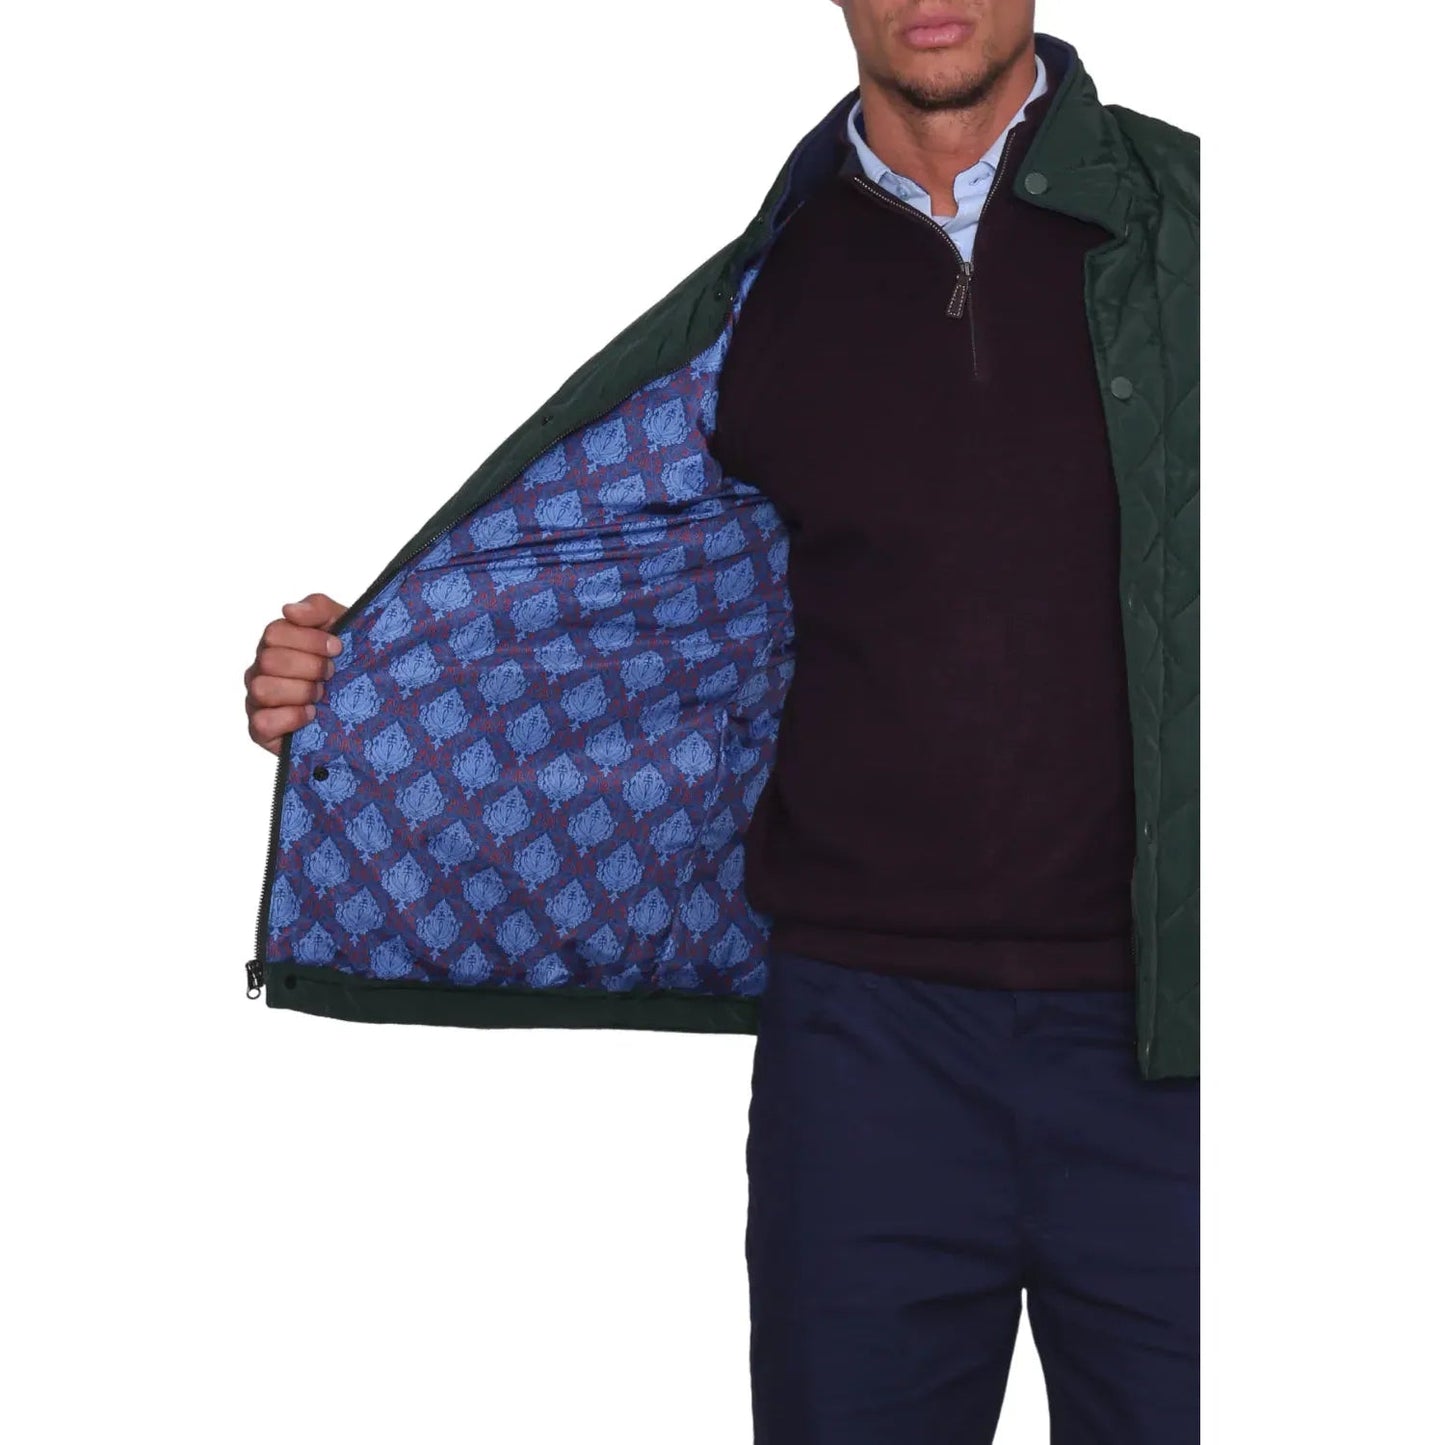 SIGNATURE QUILTED JACKET - Grip On Golf & Pickleball Zone